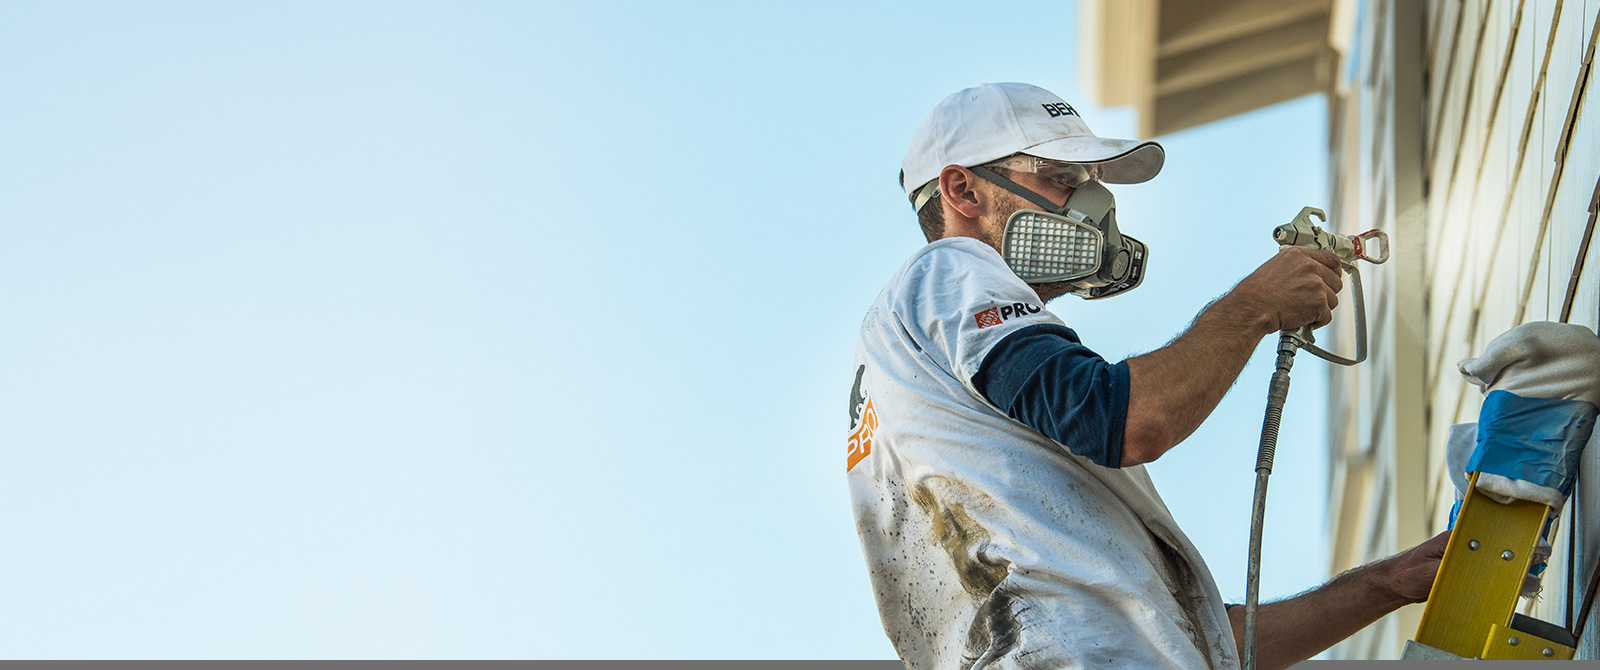 Image of a Pro Contractor wearing a hat and shirt with Behr logo spray painting an exterior wall of a house on a ladder.